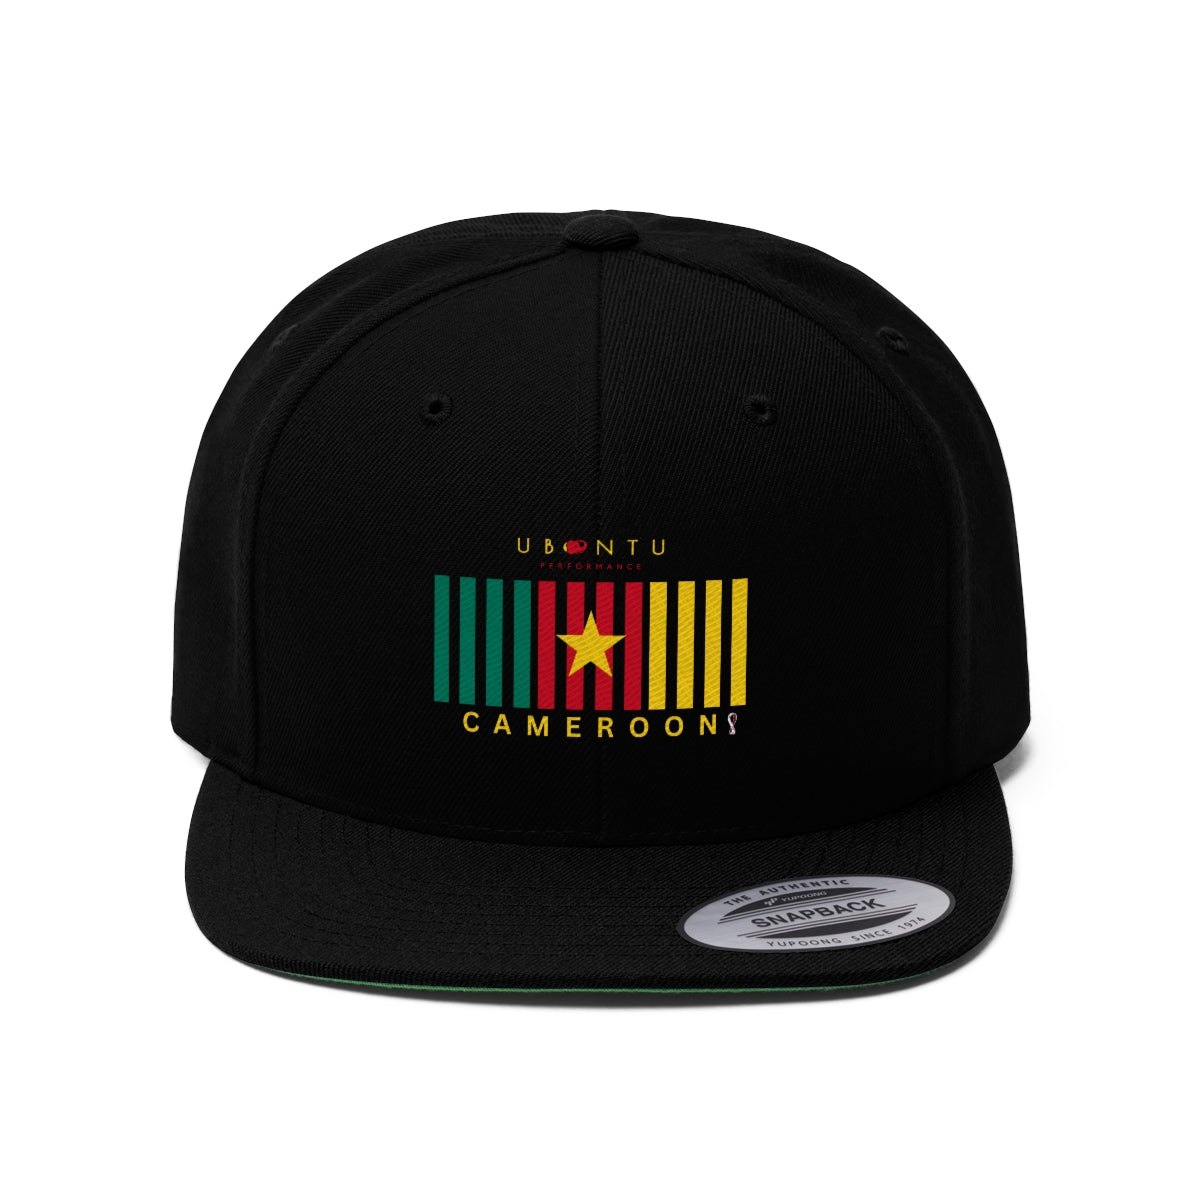 Cameroon  flag colors  unisex hat football soccer fans  world cup gift hat